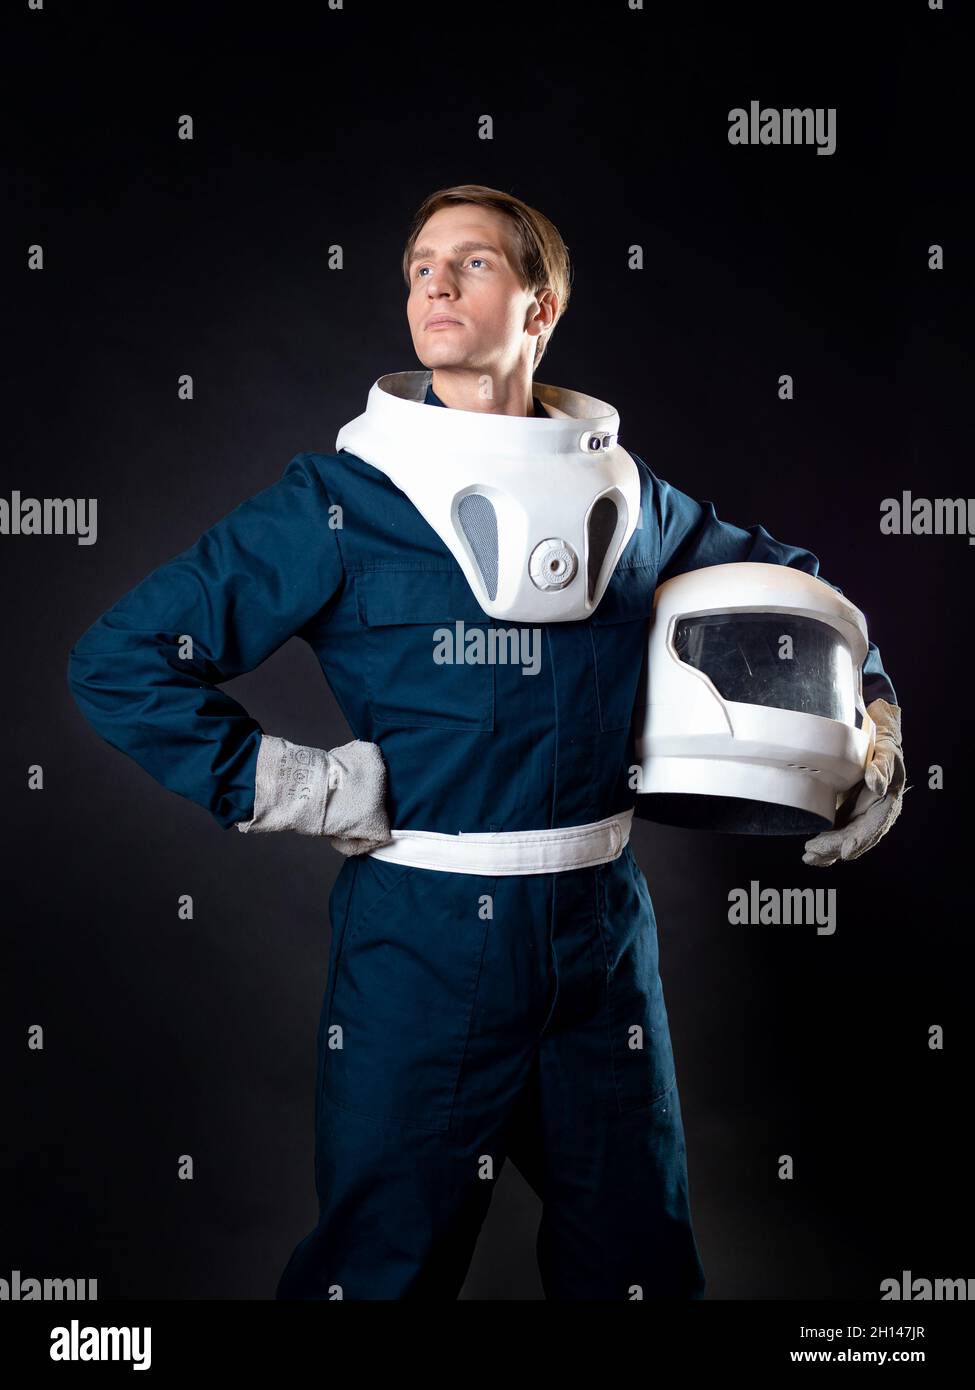 An astronaut or a space tourist. A young man in a spacesuit holds a helmet in his hands and smiles while waiting for takeoff Stock Photo